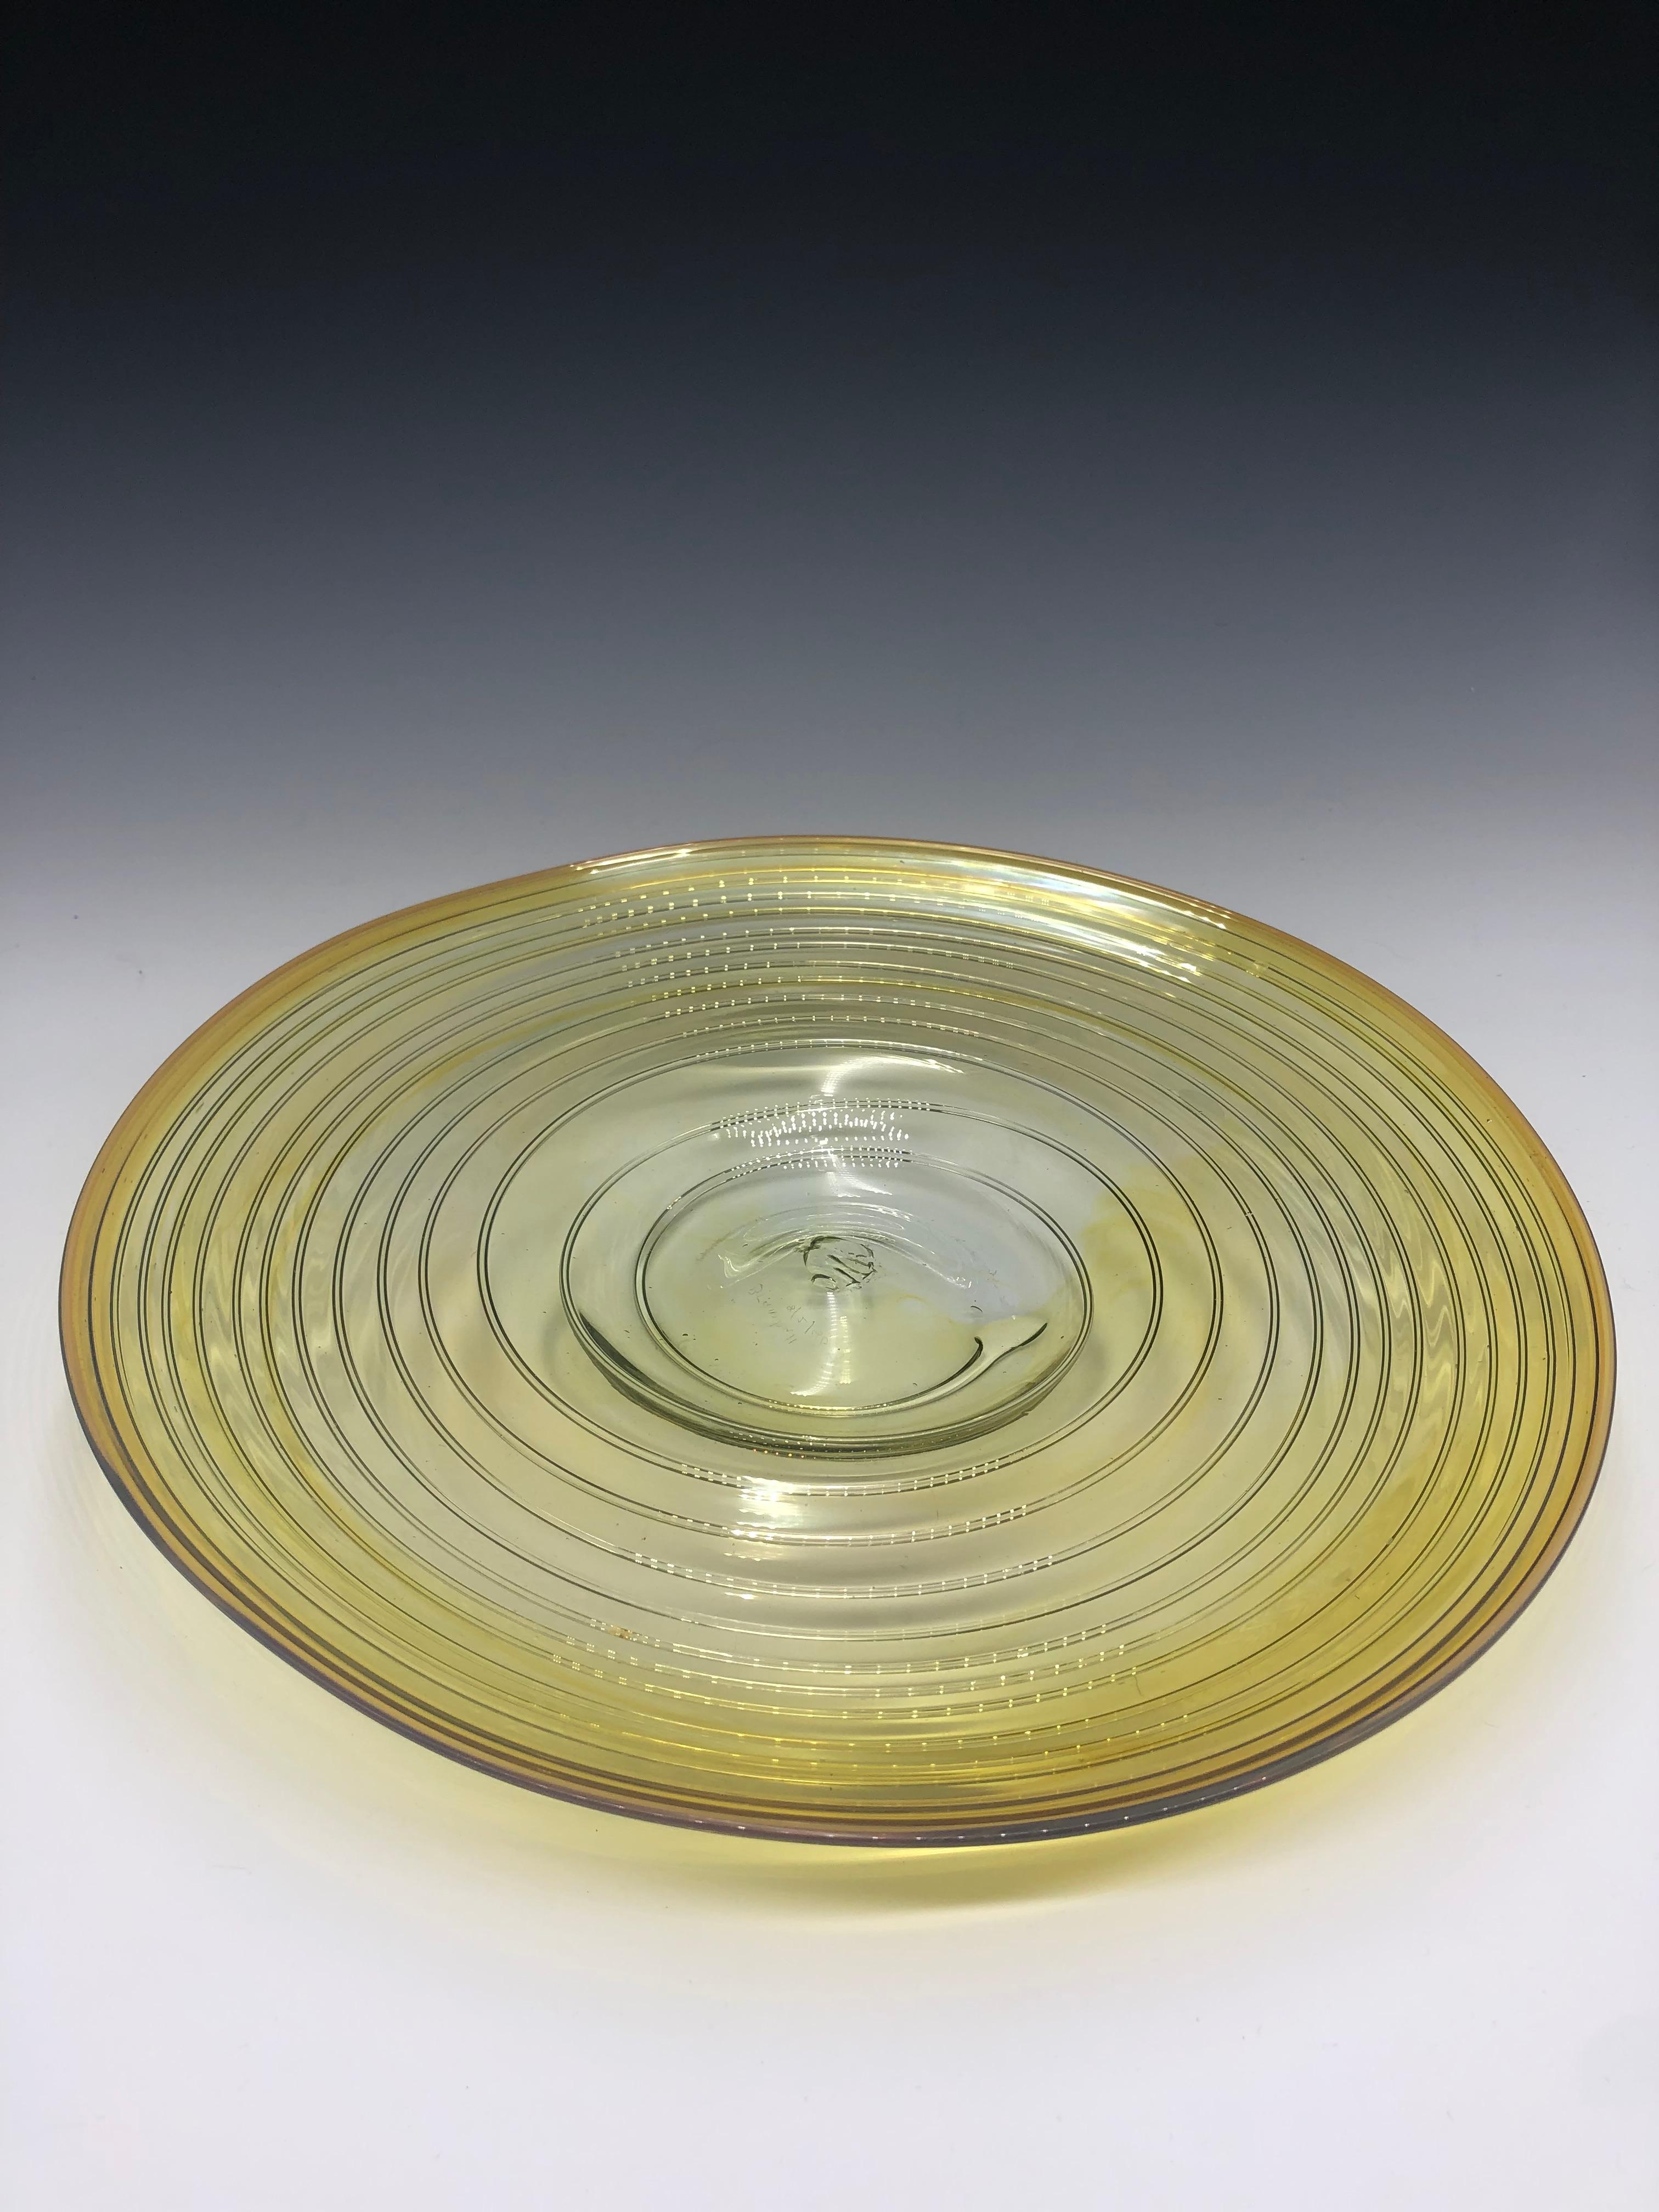 Vintage 1980s Hand Blown Studio Art Glass Plate by Peter Bramhall For Sale 2